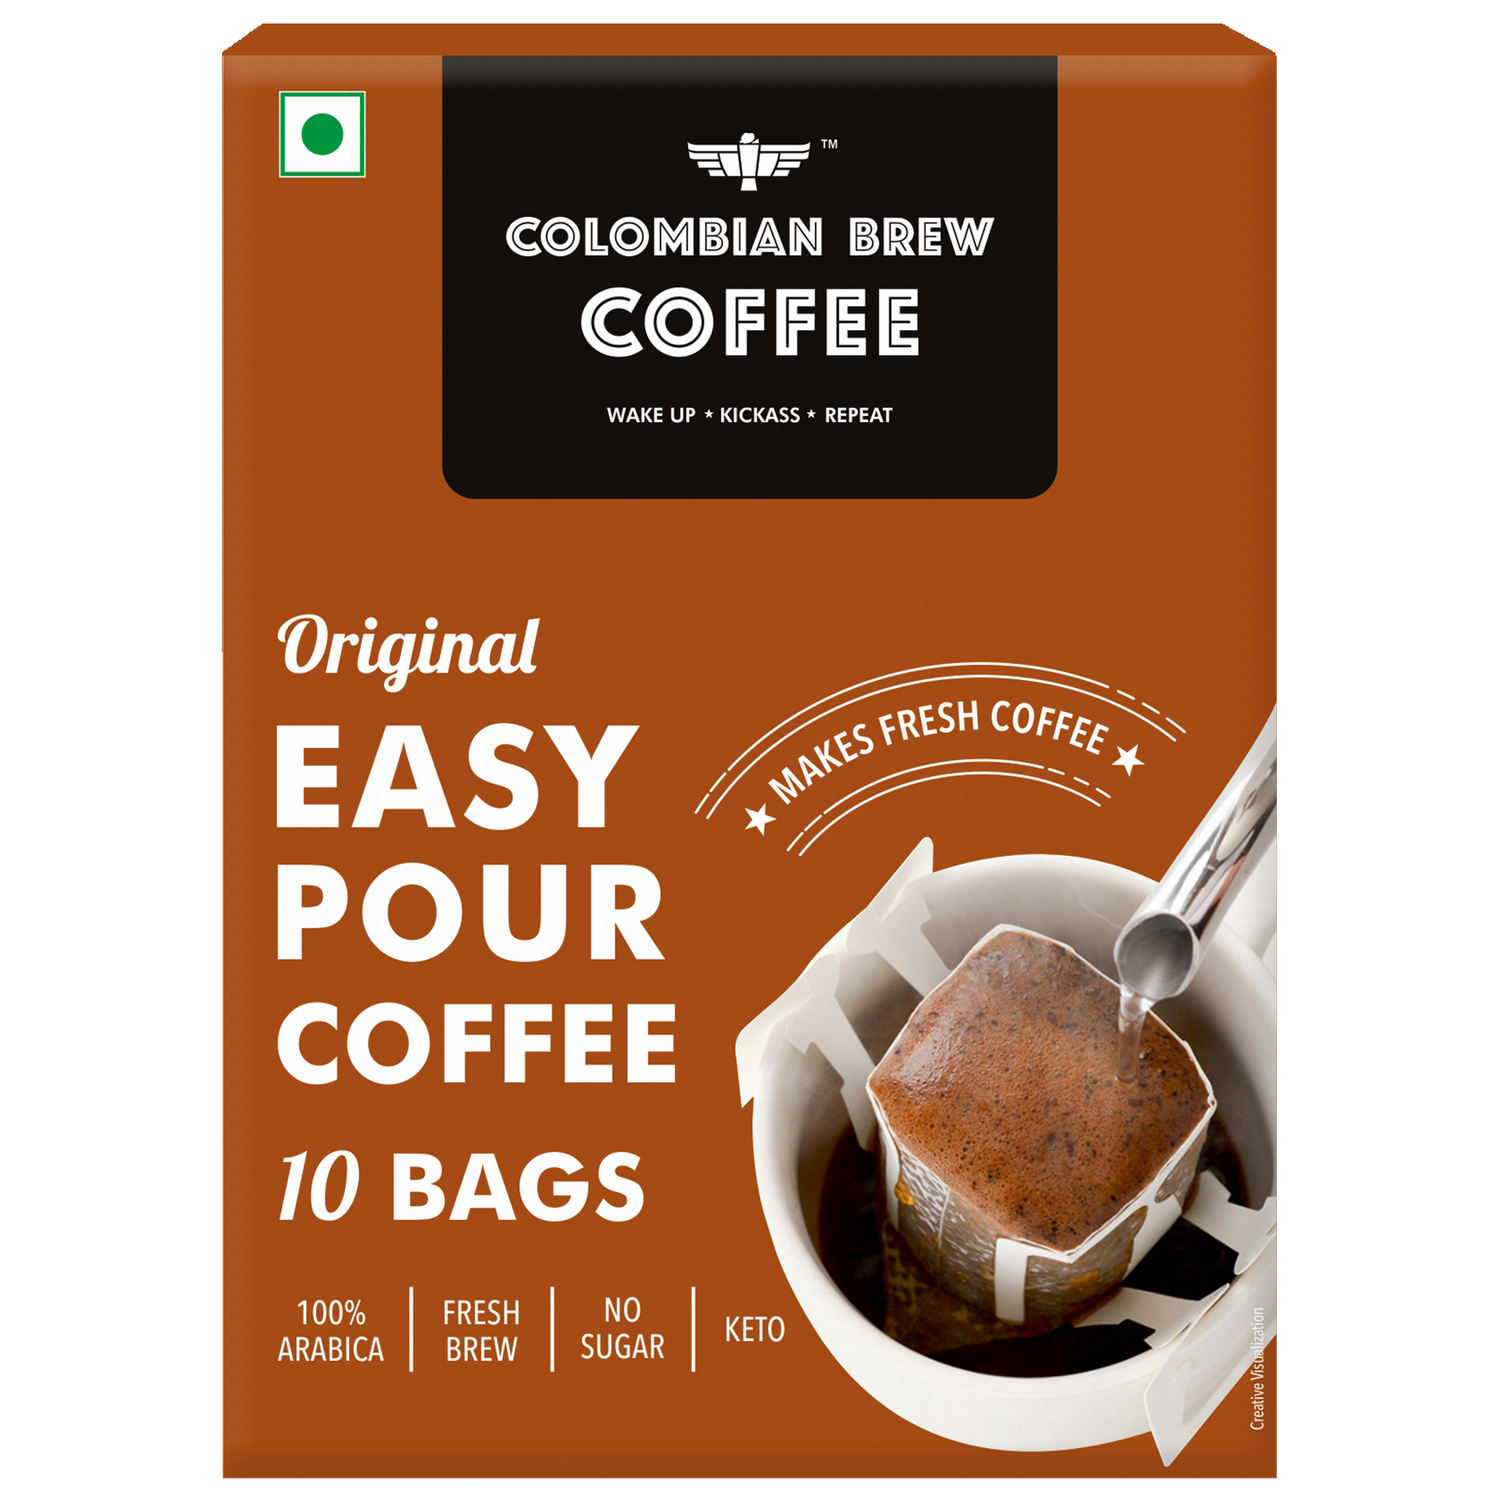 Colombian Brew Coffee  Original Easy Pour 10 Bags, 100g 